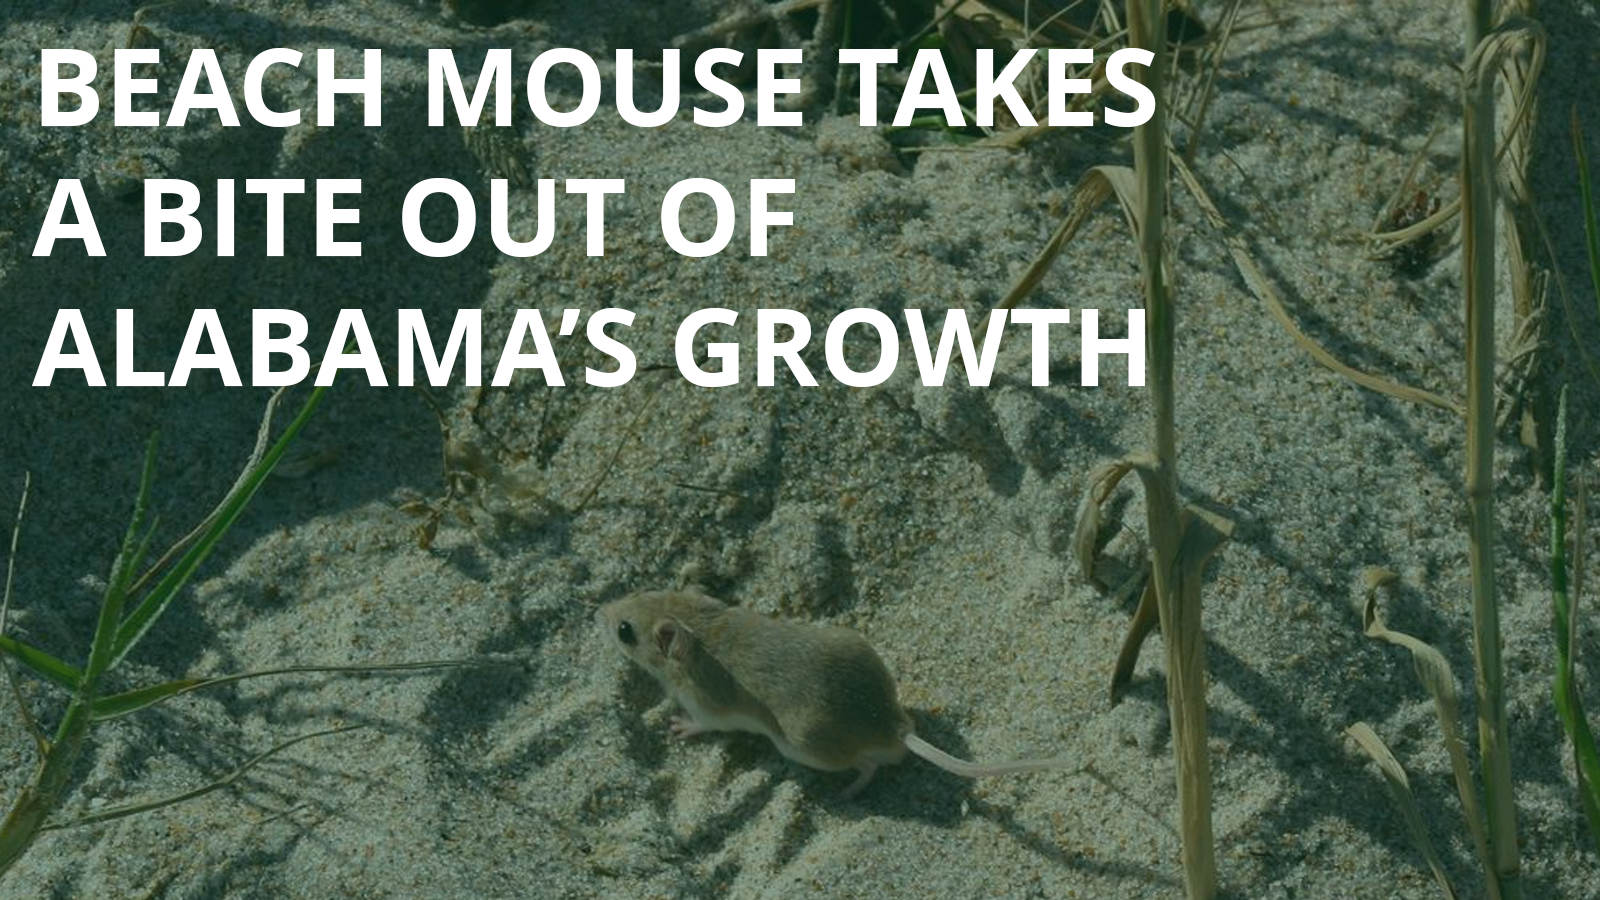 Beach Mouse Takes A Bite Out of Alabama’s Growth